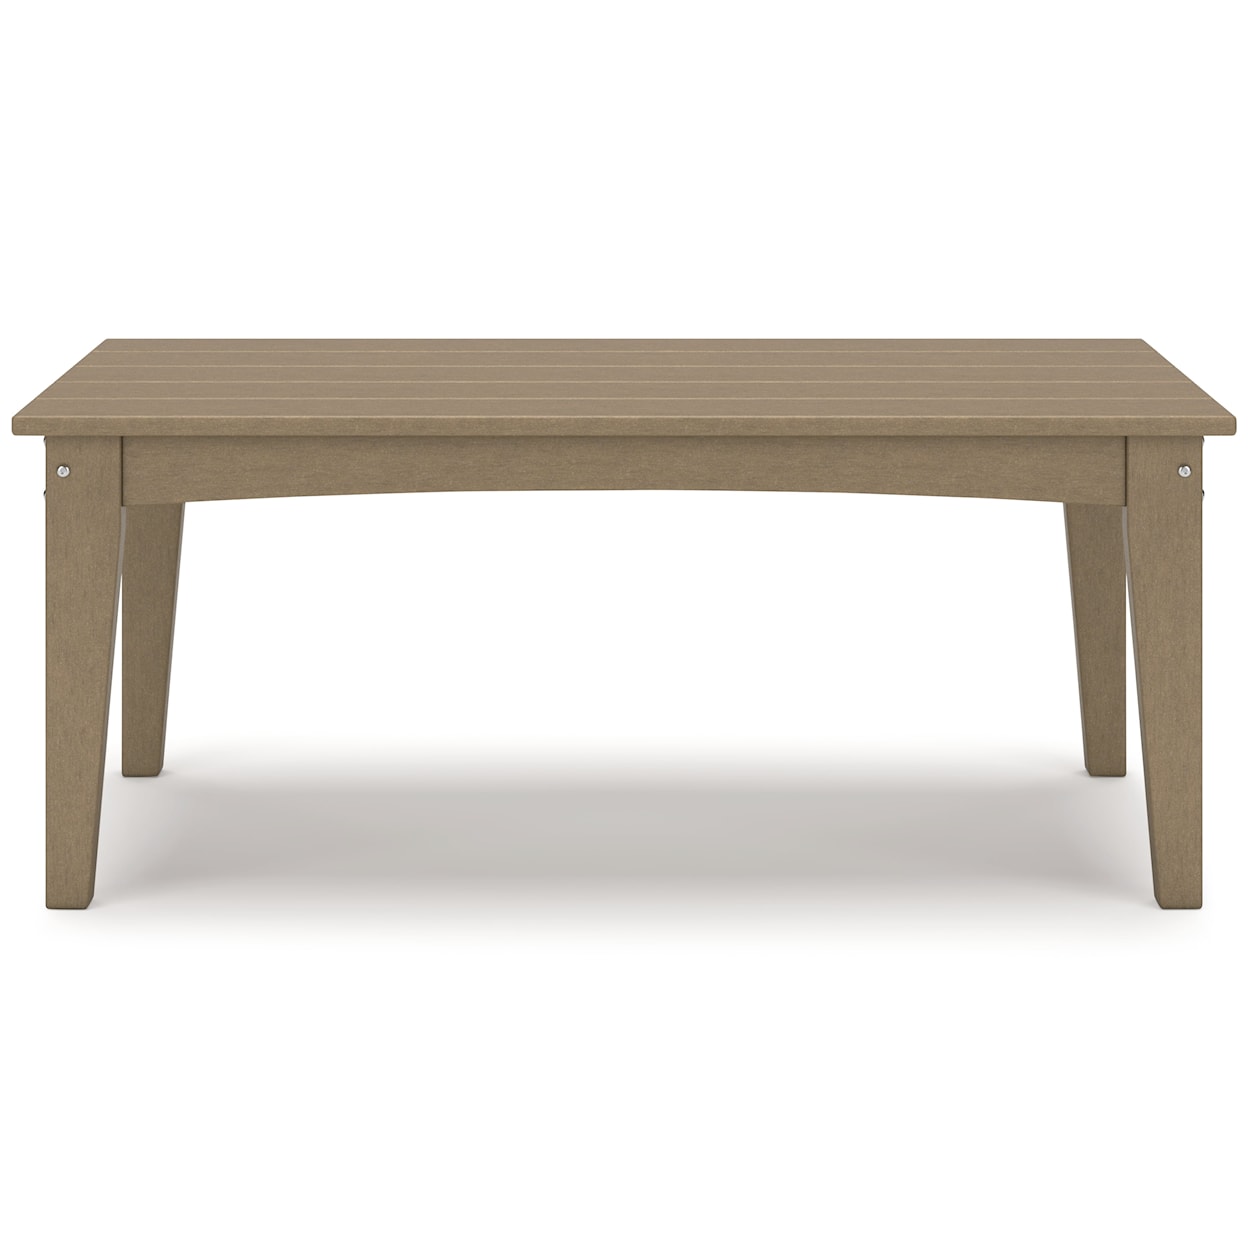 Benchcraft Hyland wave Outdoor Coffee Table